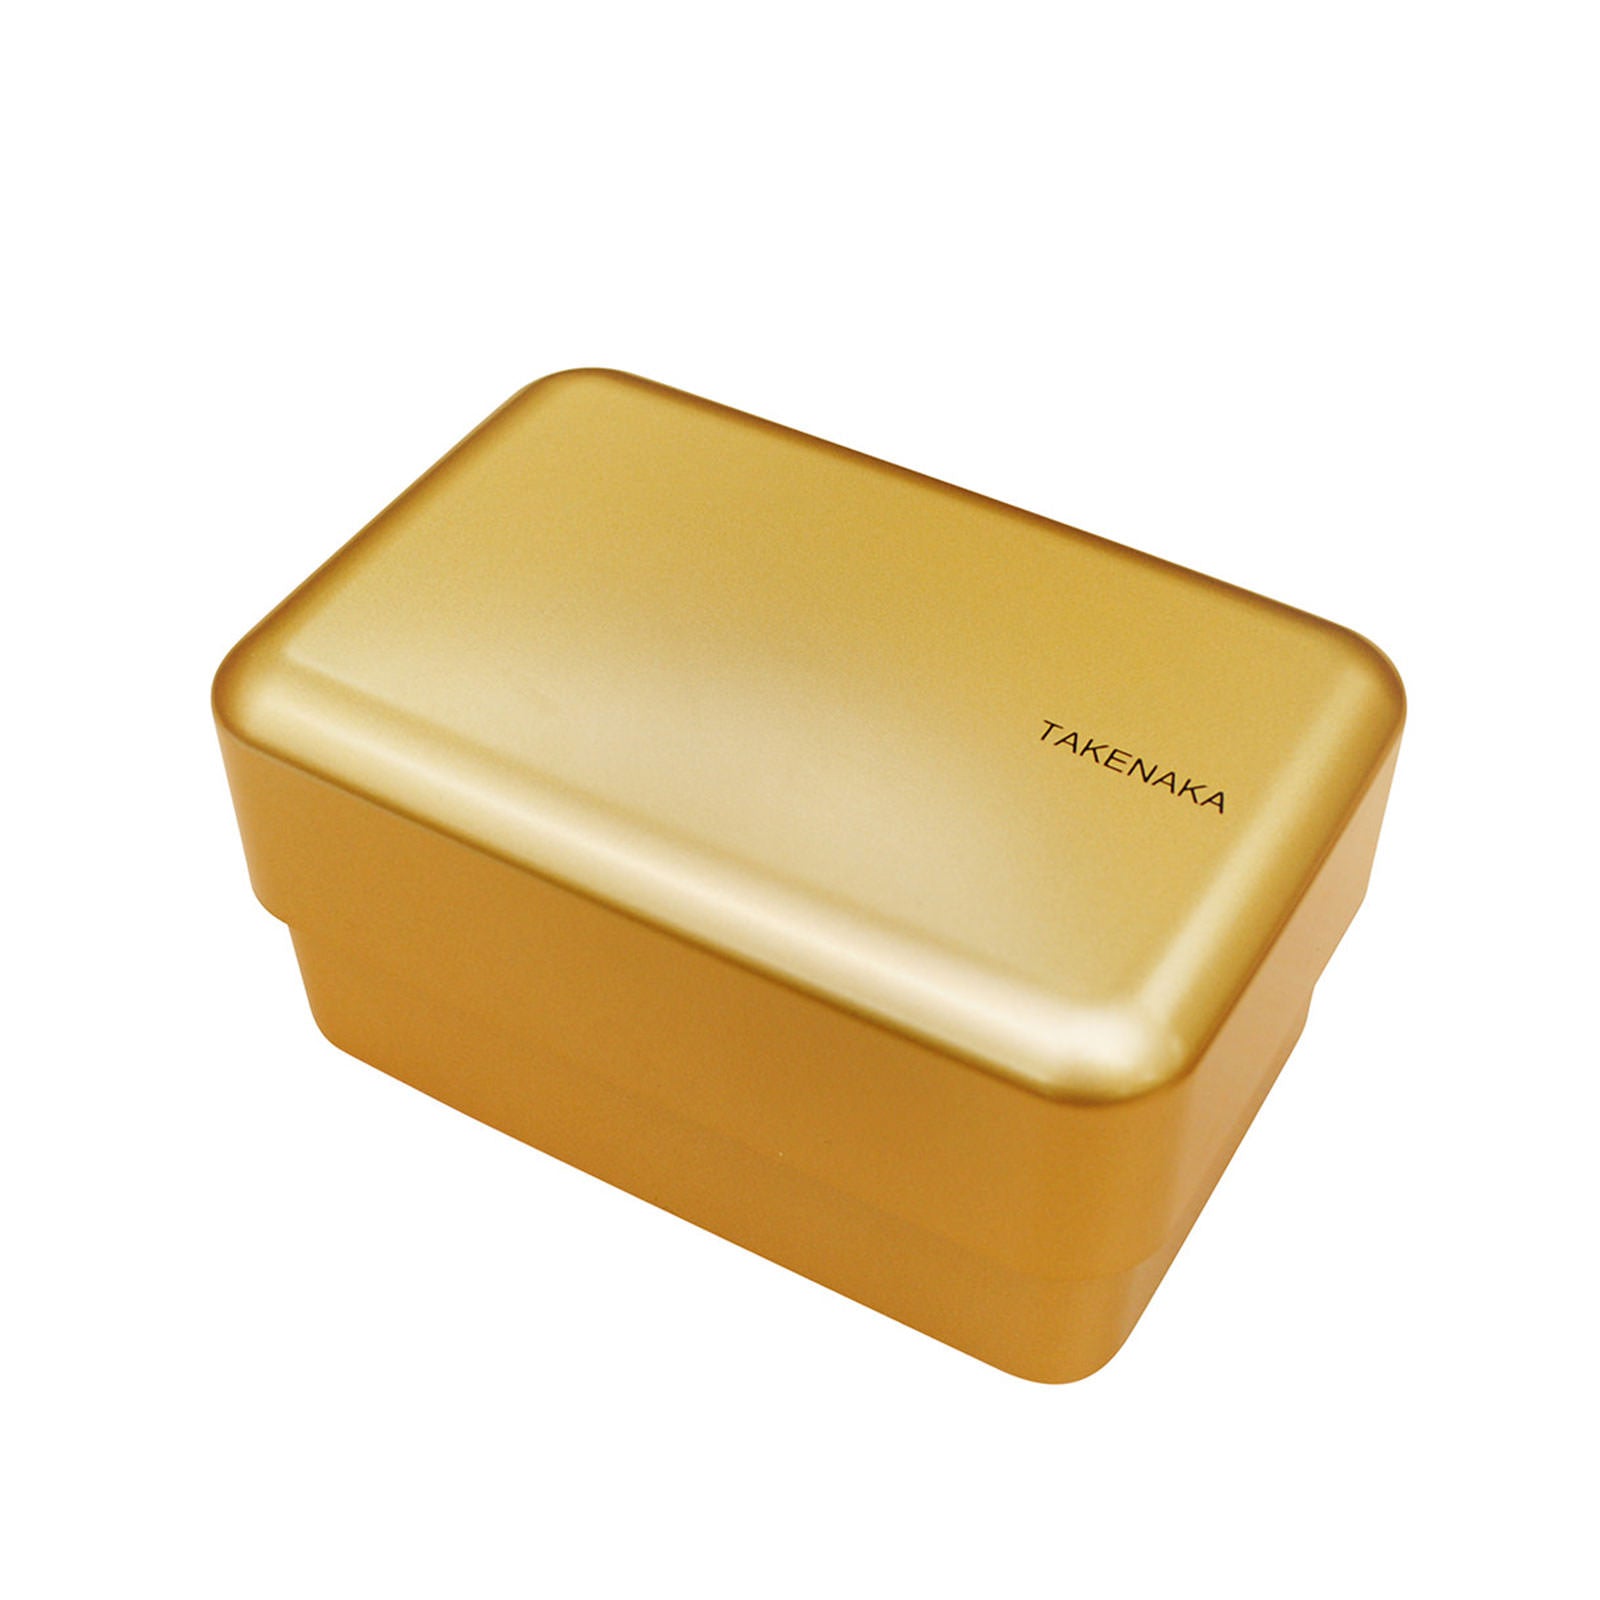 Bento Nibble Box, Eco-Friendly Lunch Box Made in Japan, BPA and Reed Free, 100% Recycle Plastic Bottle Use, Microwave and Dishwasher Safe, TAKENAKA